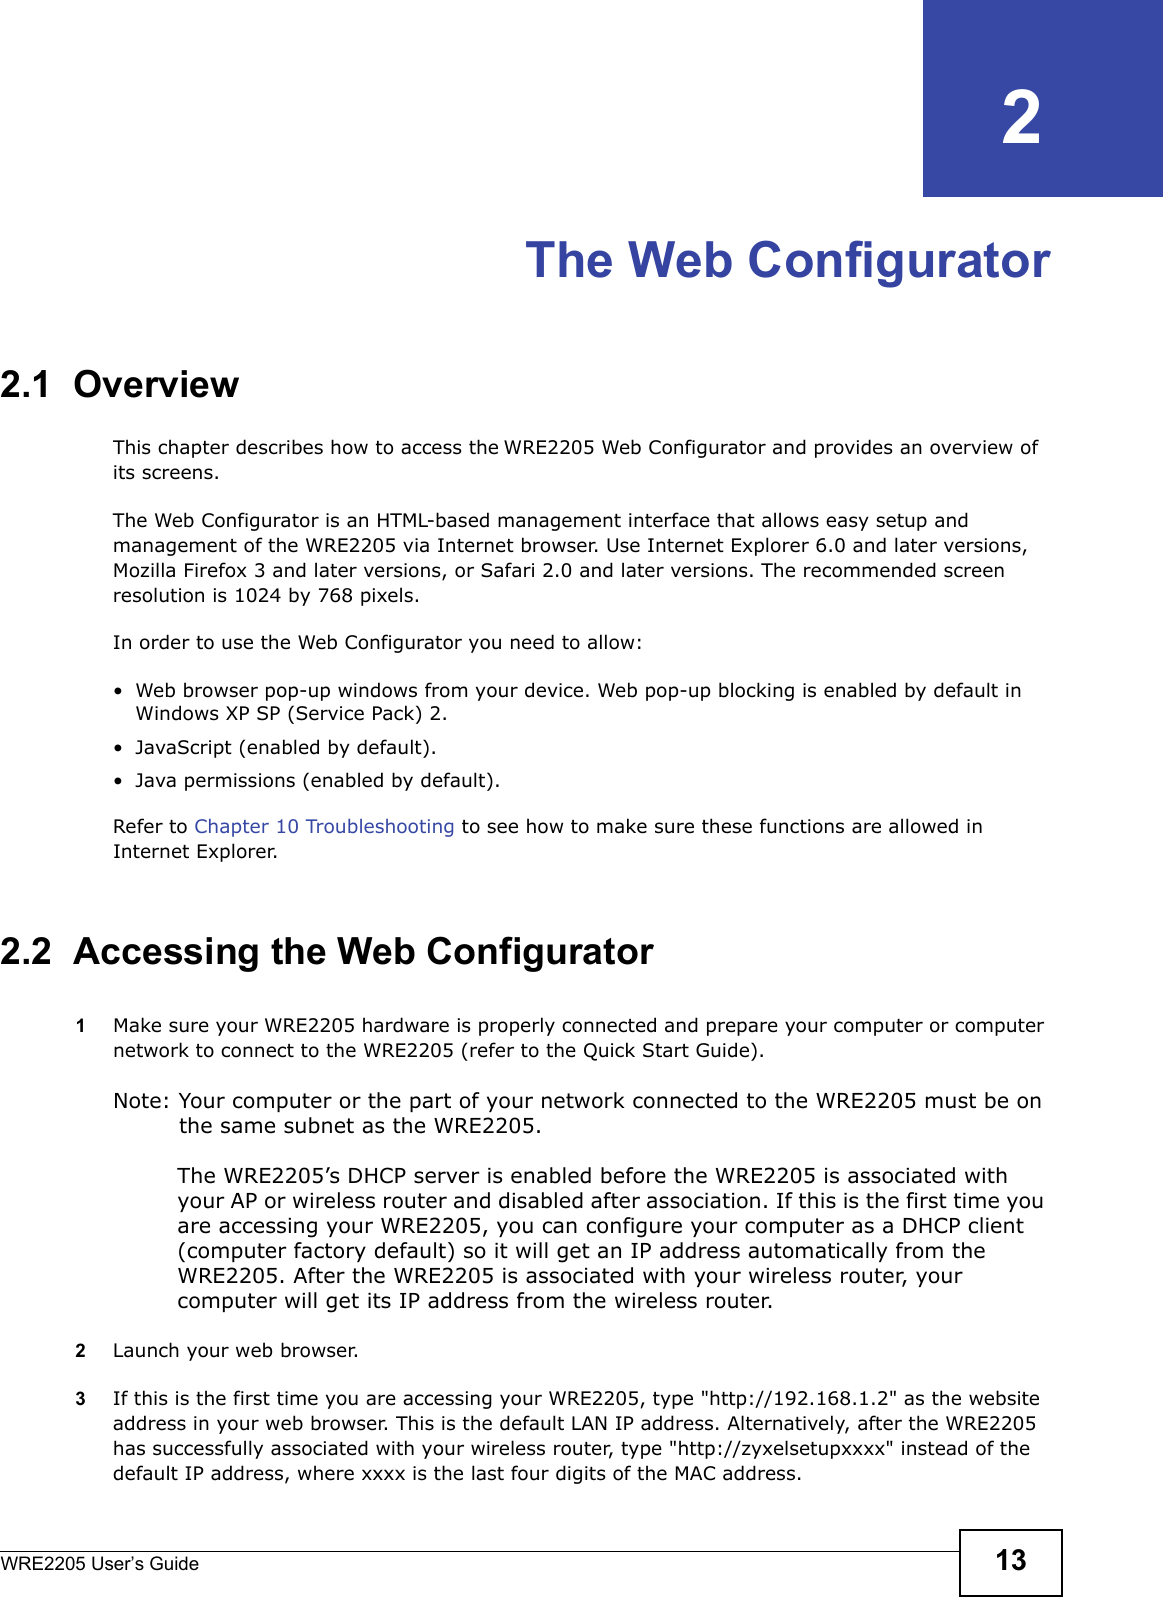 WRE2205 User’s Guide 13CHAPTER   2The Web Configurator2.1  OverviewThis chapter describes how to access the WRE2205 Web Configurator and provides an overview of its screens.The Web Configurator is an HTML-based management interface that allows easy setup and management of the WRE2205 via Internet browser. Use Internet Explorer 6.0 and later versions, Mozilla Firefox 3 and later versions, or Safari 2.0 and later versions. The recommended screen resolution is 1024 by 768 pixels.In order to use the Web Configurator you need to allow:• Web browser pop-up windows from your device. Web pop-up blocking is enabled by default in Windows XP SP (Service Pack) 2.• JavaScript (enabled by default).• Java permissions (enabled by default).Refer to Chapter 10 Troubleshooting to see how to make sure these functions are allowed in Internet Explorer.2.2  Accessing the Web Configurator1Make sure your WRE2205 hardware is properly connected and prepare your computer or computer network to connect to the WRE2205 (refer to the Quick Start Guide).Note: Your computer or the part of your network connected to the WRE2205 must be on the same subnet as the WRE2205. The WRE2205’s DHCP server is enabled before the WRE2205 is associated with your AP or wireless router and disabled after association. If this is the first time you are accessing your WRE2205, you can configure your computer as a DHCP client (computer factory default) so it will get an IP address automatically from the WRE2205. After the WRE2205 is associated with your wireless router, your computer will get its IP address from the wireless router.2Launch your web browser.3If this is the first time you are accessing your WRE2205, type &quot;http://192.168.1.2&quot; as the website address in your web browser. This is the default LAN IP address. Alternatively, after the WRE2205 has successfully associated with your wireless router, type &quot;http://zyxelsetupxxxx&quot; instead of the default IP address, where xxxx is the last four digits of the MAC address.